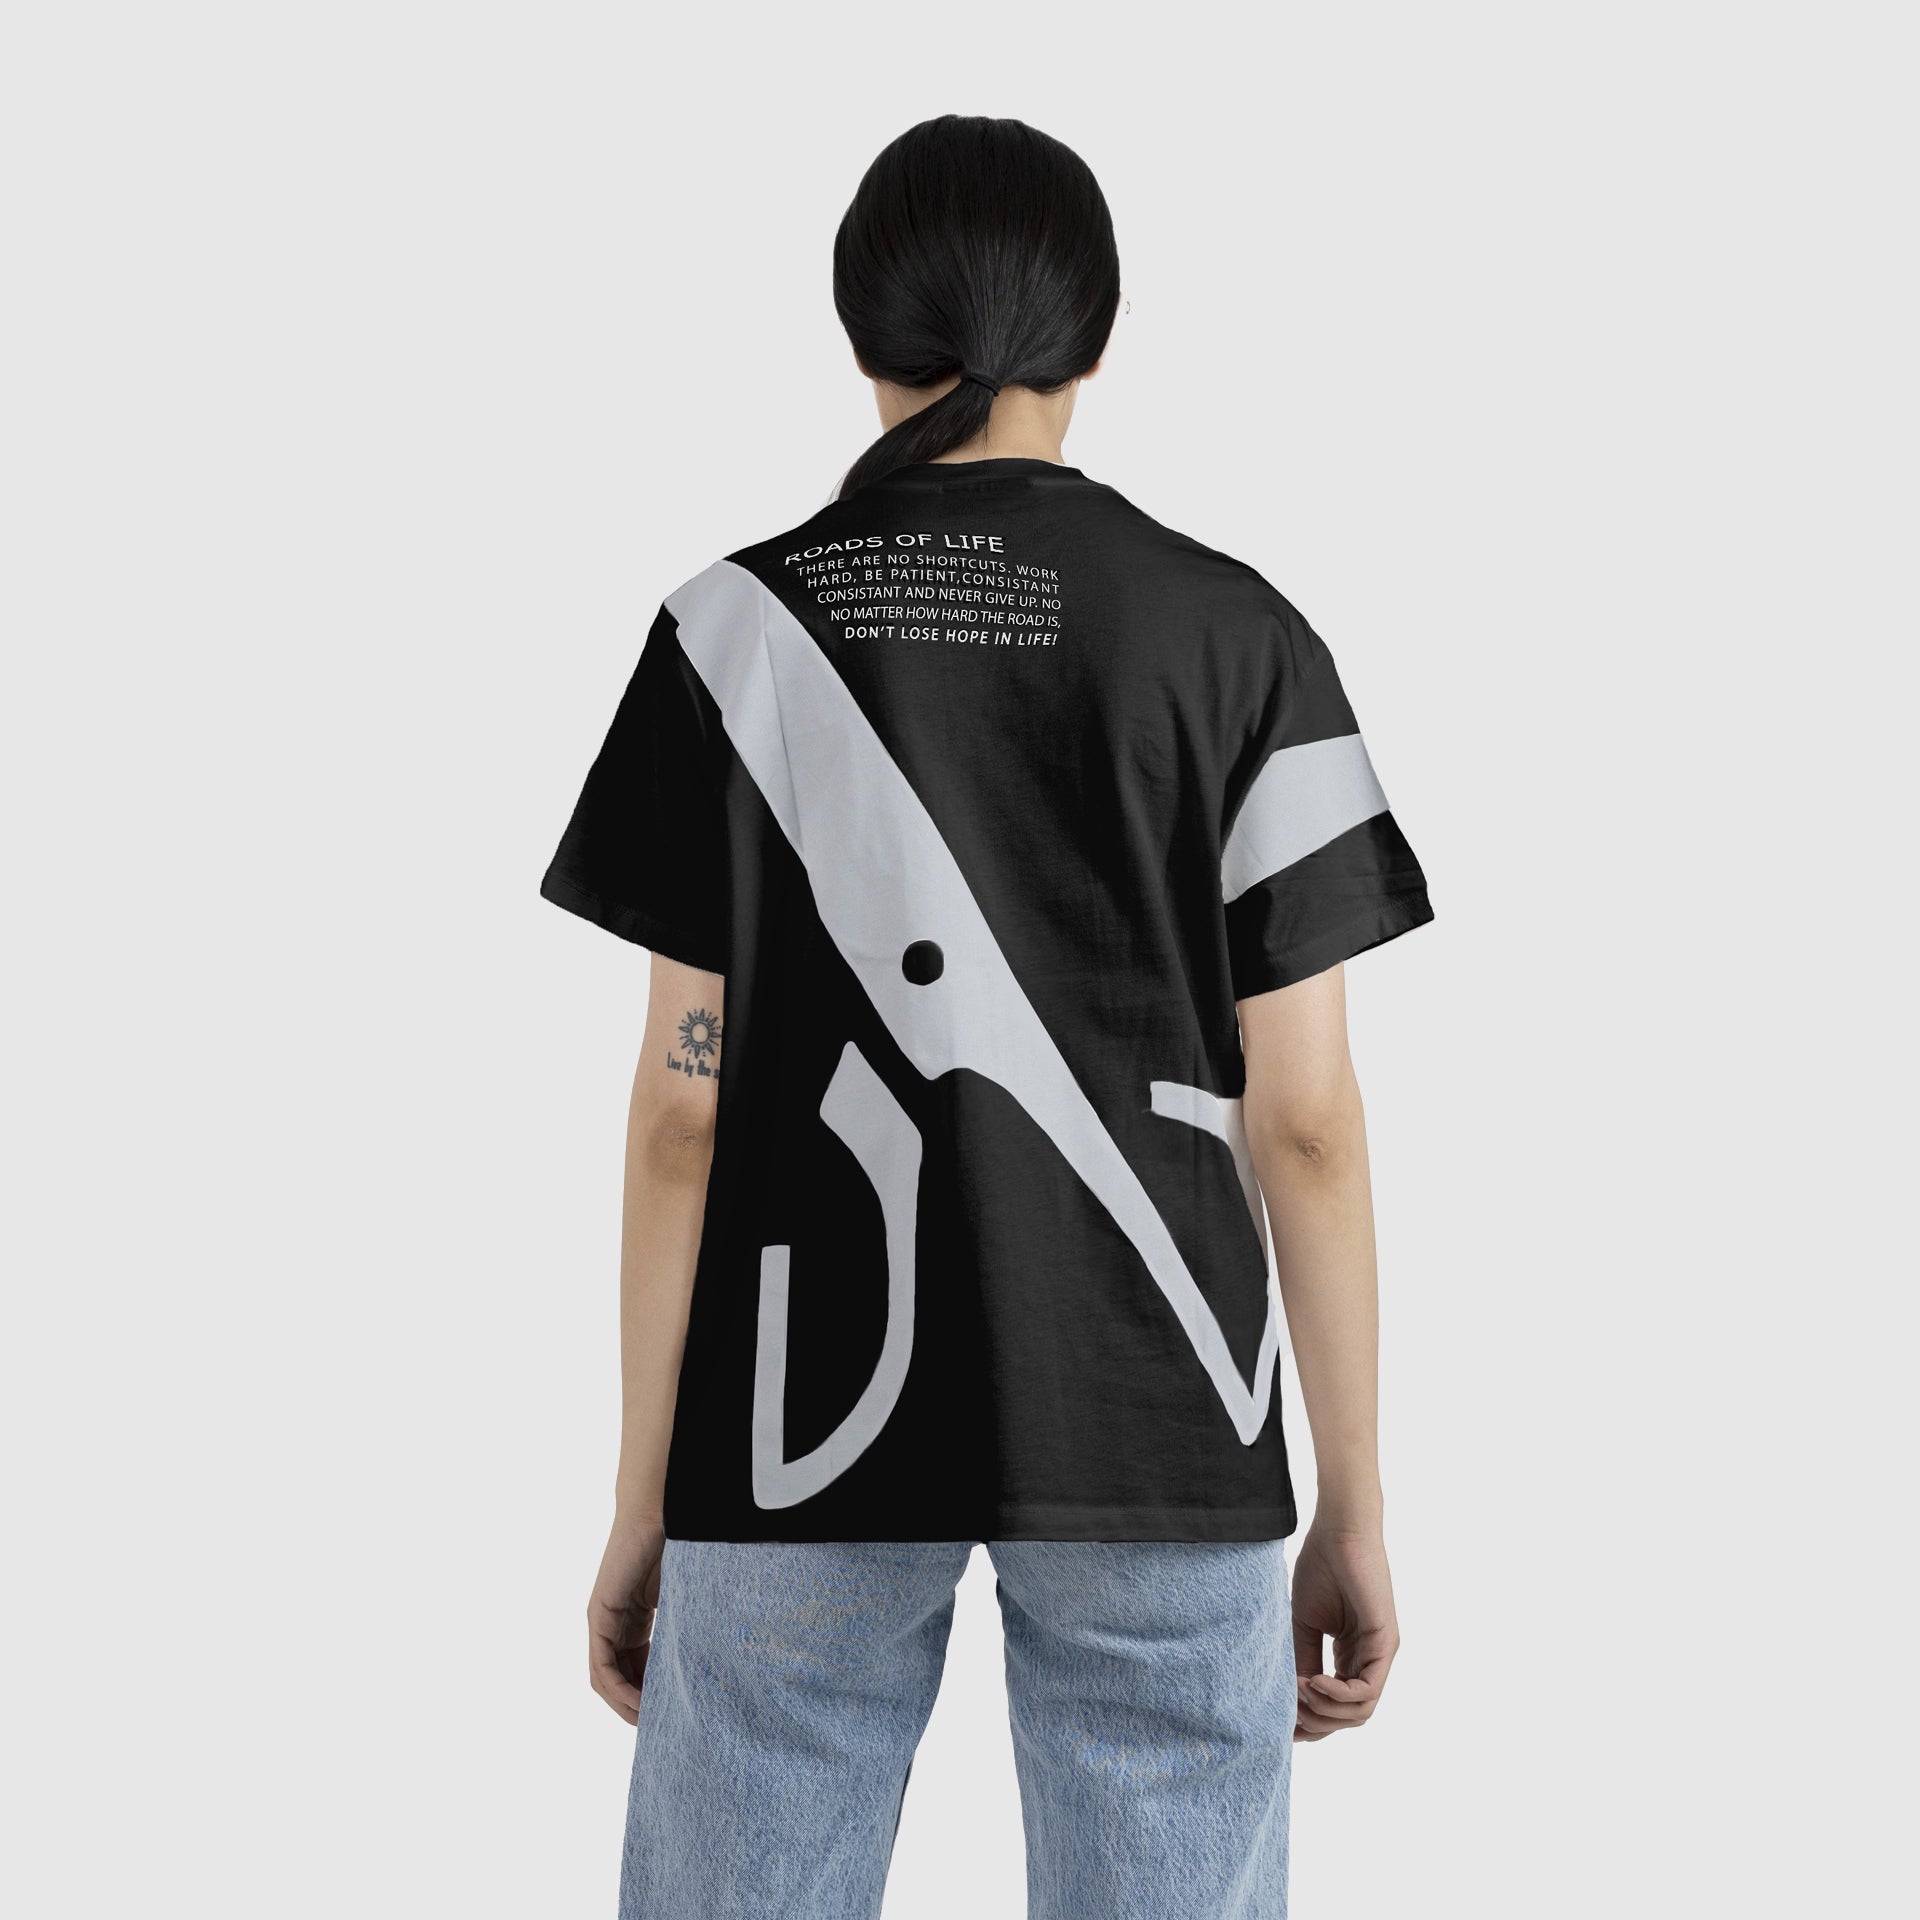 Black T-shirt With Scissors Print From Weaver Design